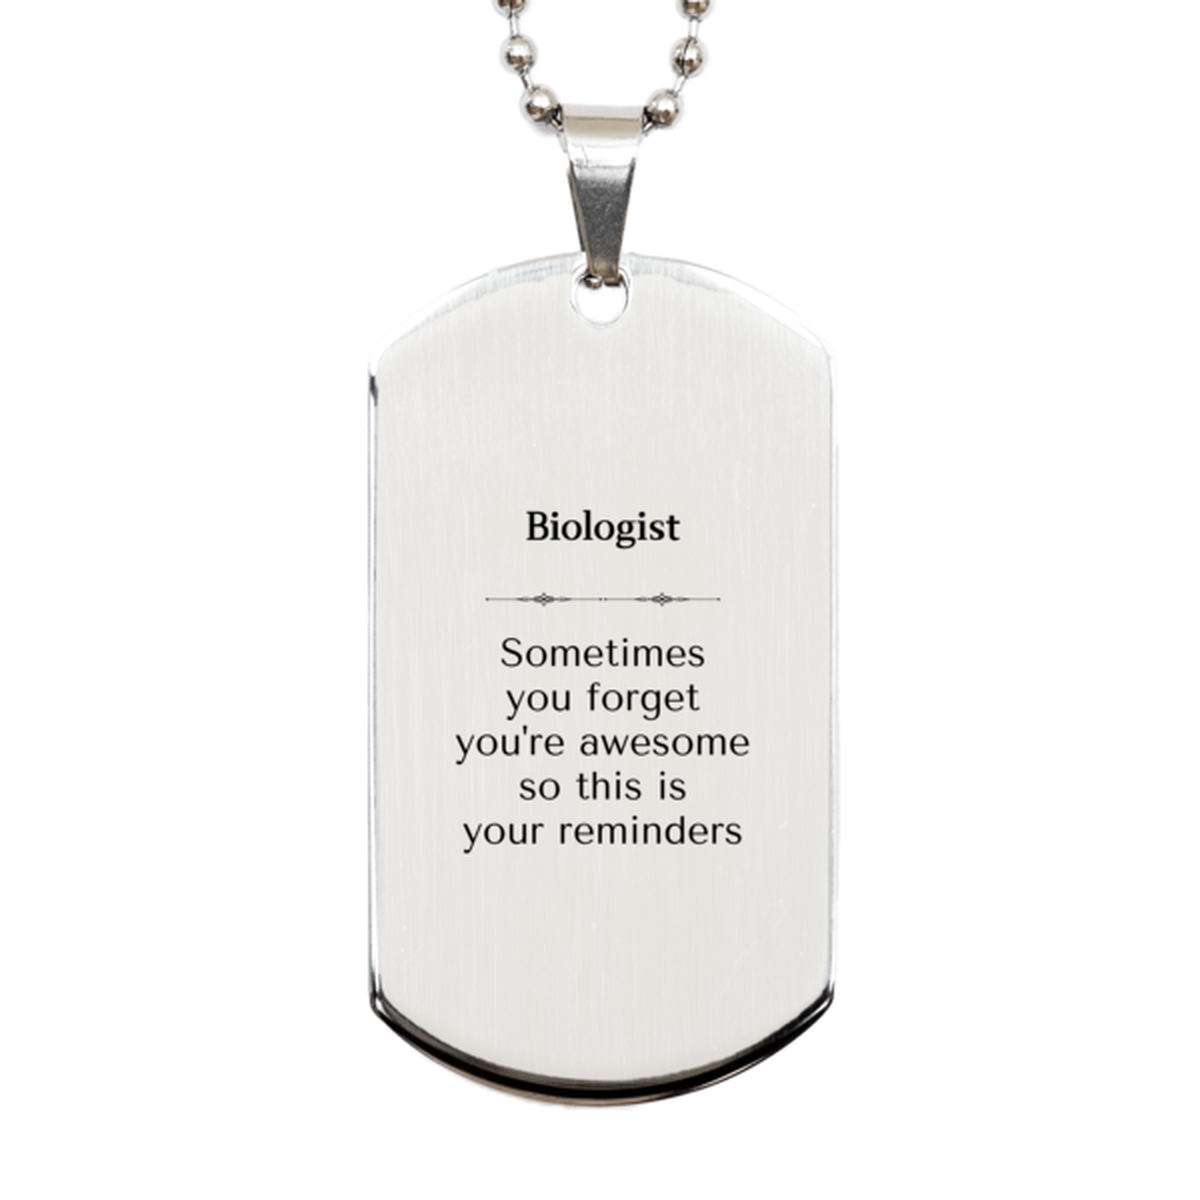 Sentimental Biologist Silver Dog Tag, Biologist Sometimes you forget you're awesome so this is your reminders, Graduation Christmas Birthday Gifts for Biologist, Men, Women, Coworkers